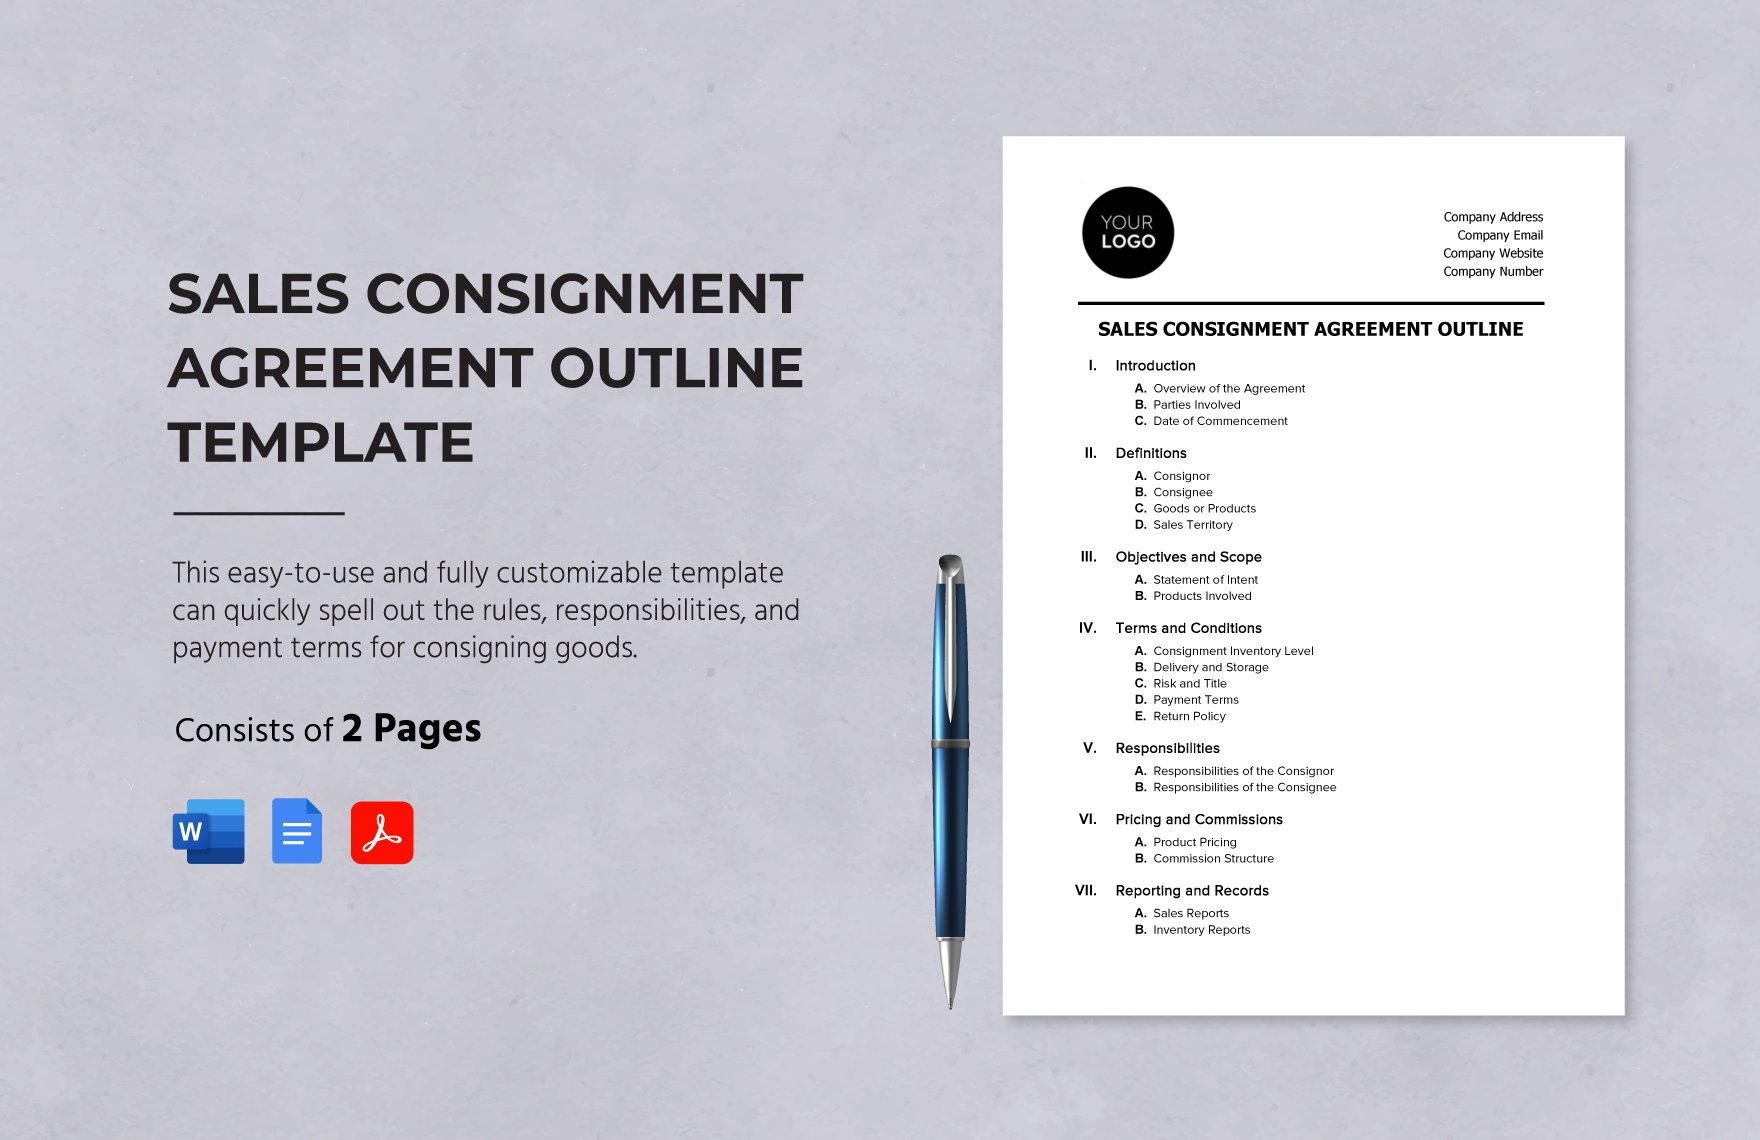 Sales Consignment Agreement Outline Template